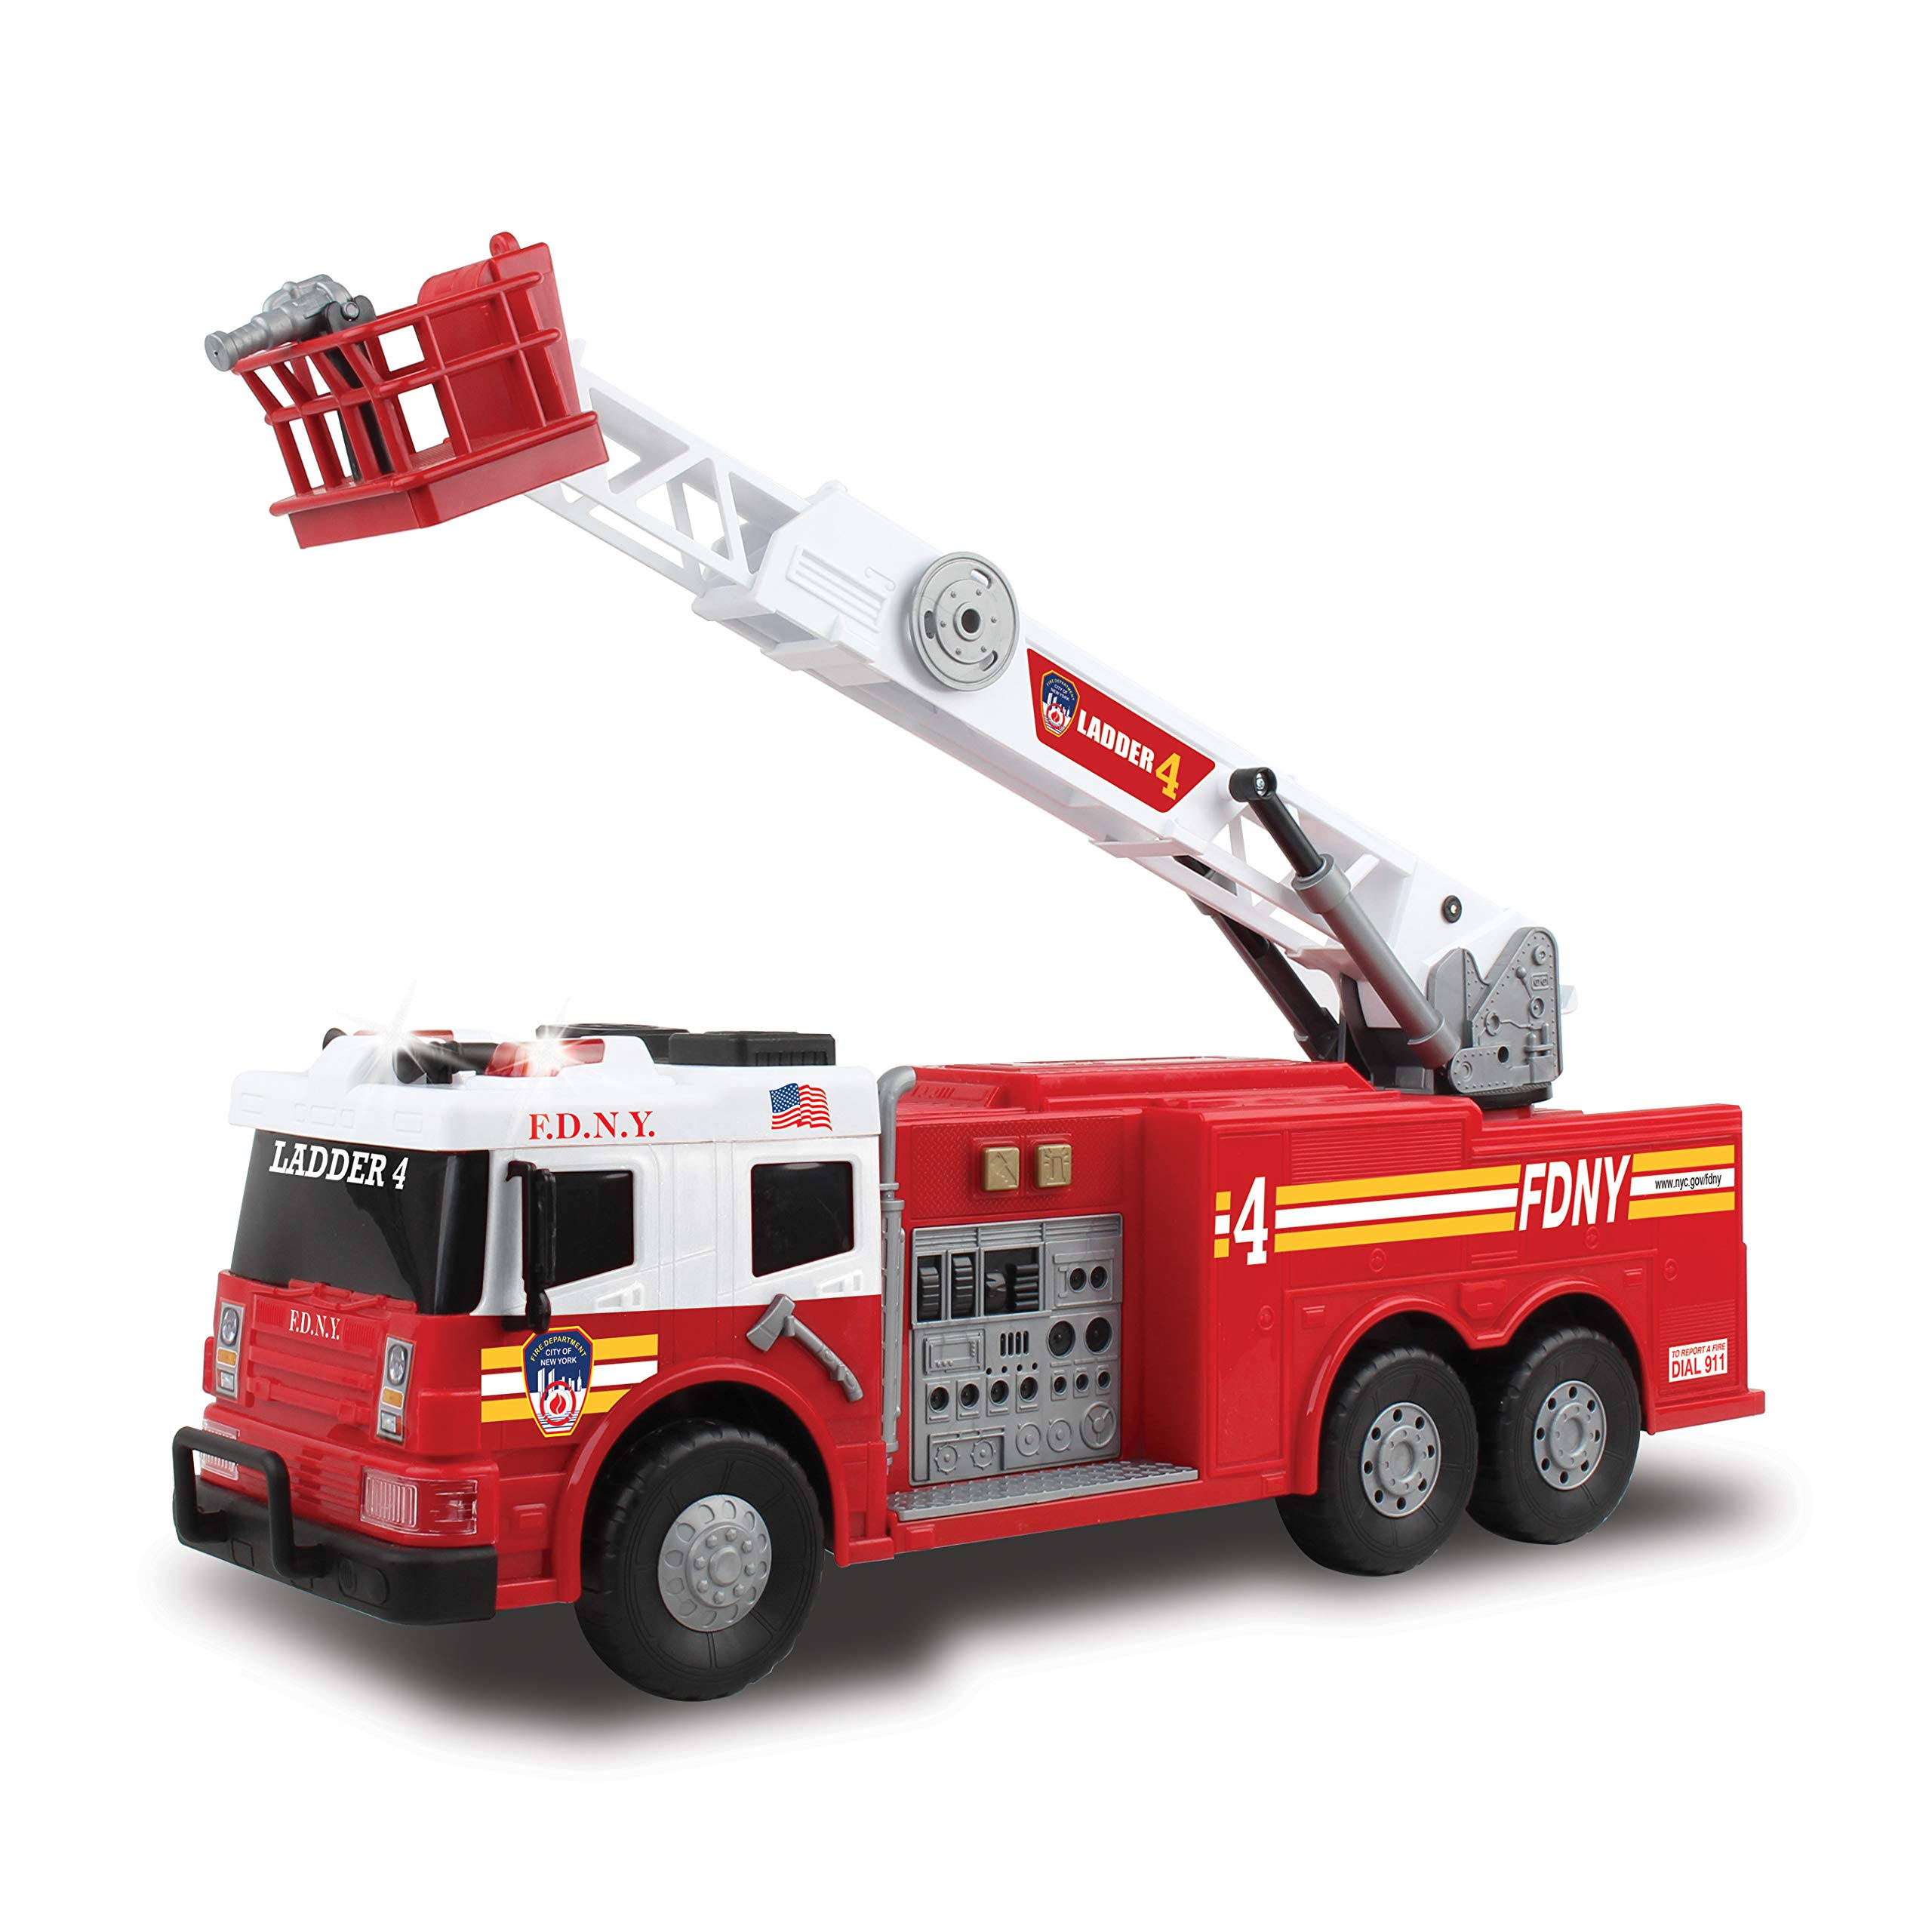 24" Fdny Ladder 4 Fire Truck with Lights & Sound